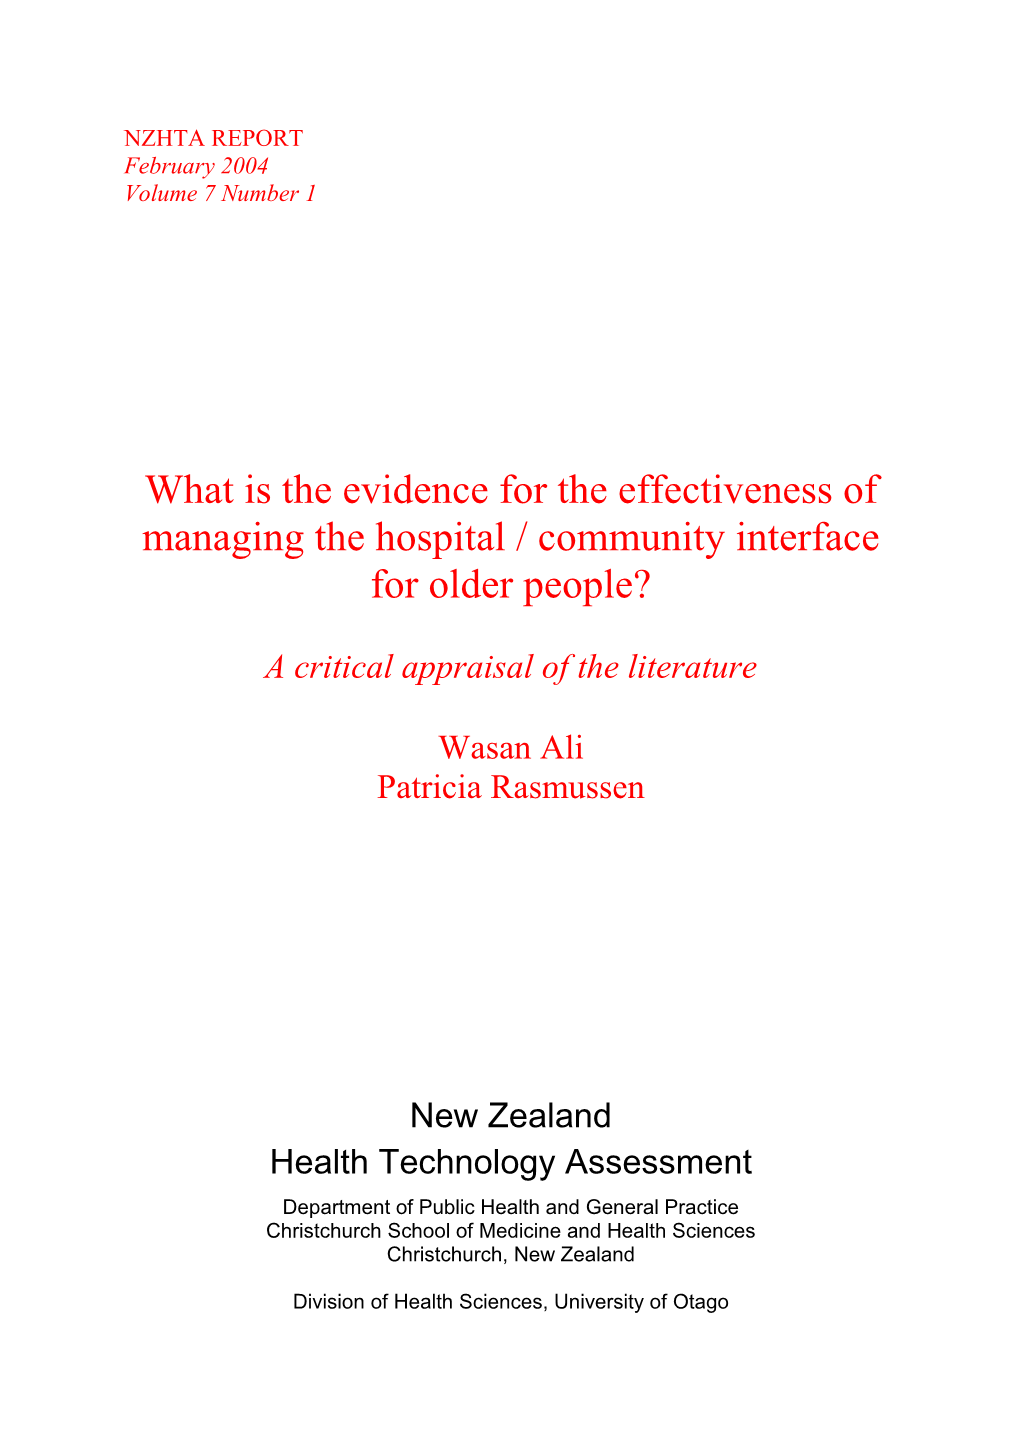 What Is the Evidence for the Effectiveness of Managing the Hospital / Community Interface for Older People?